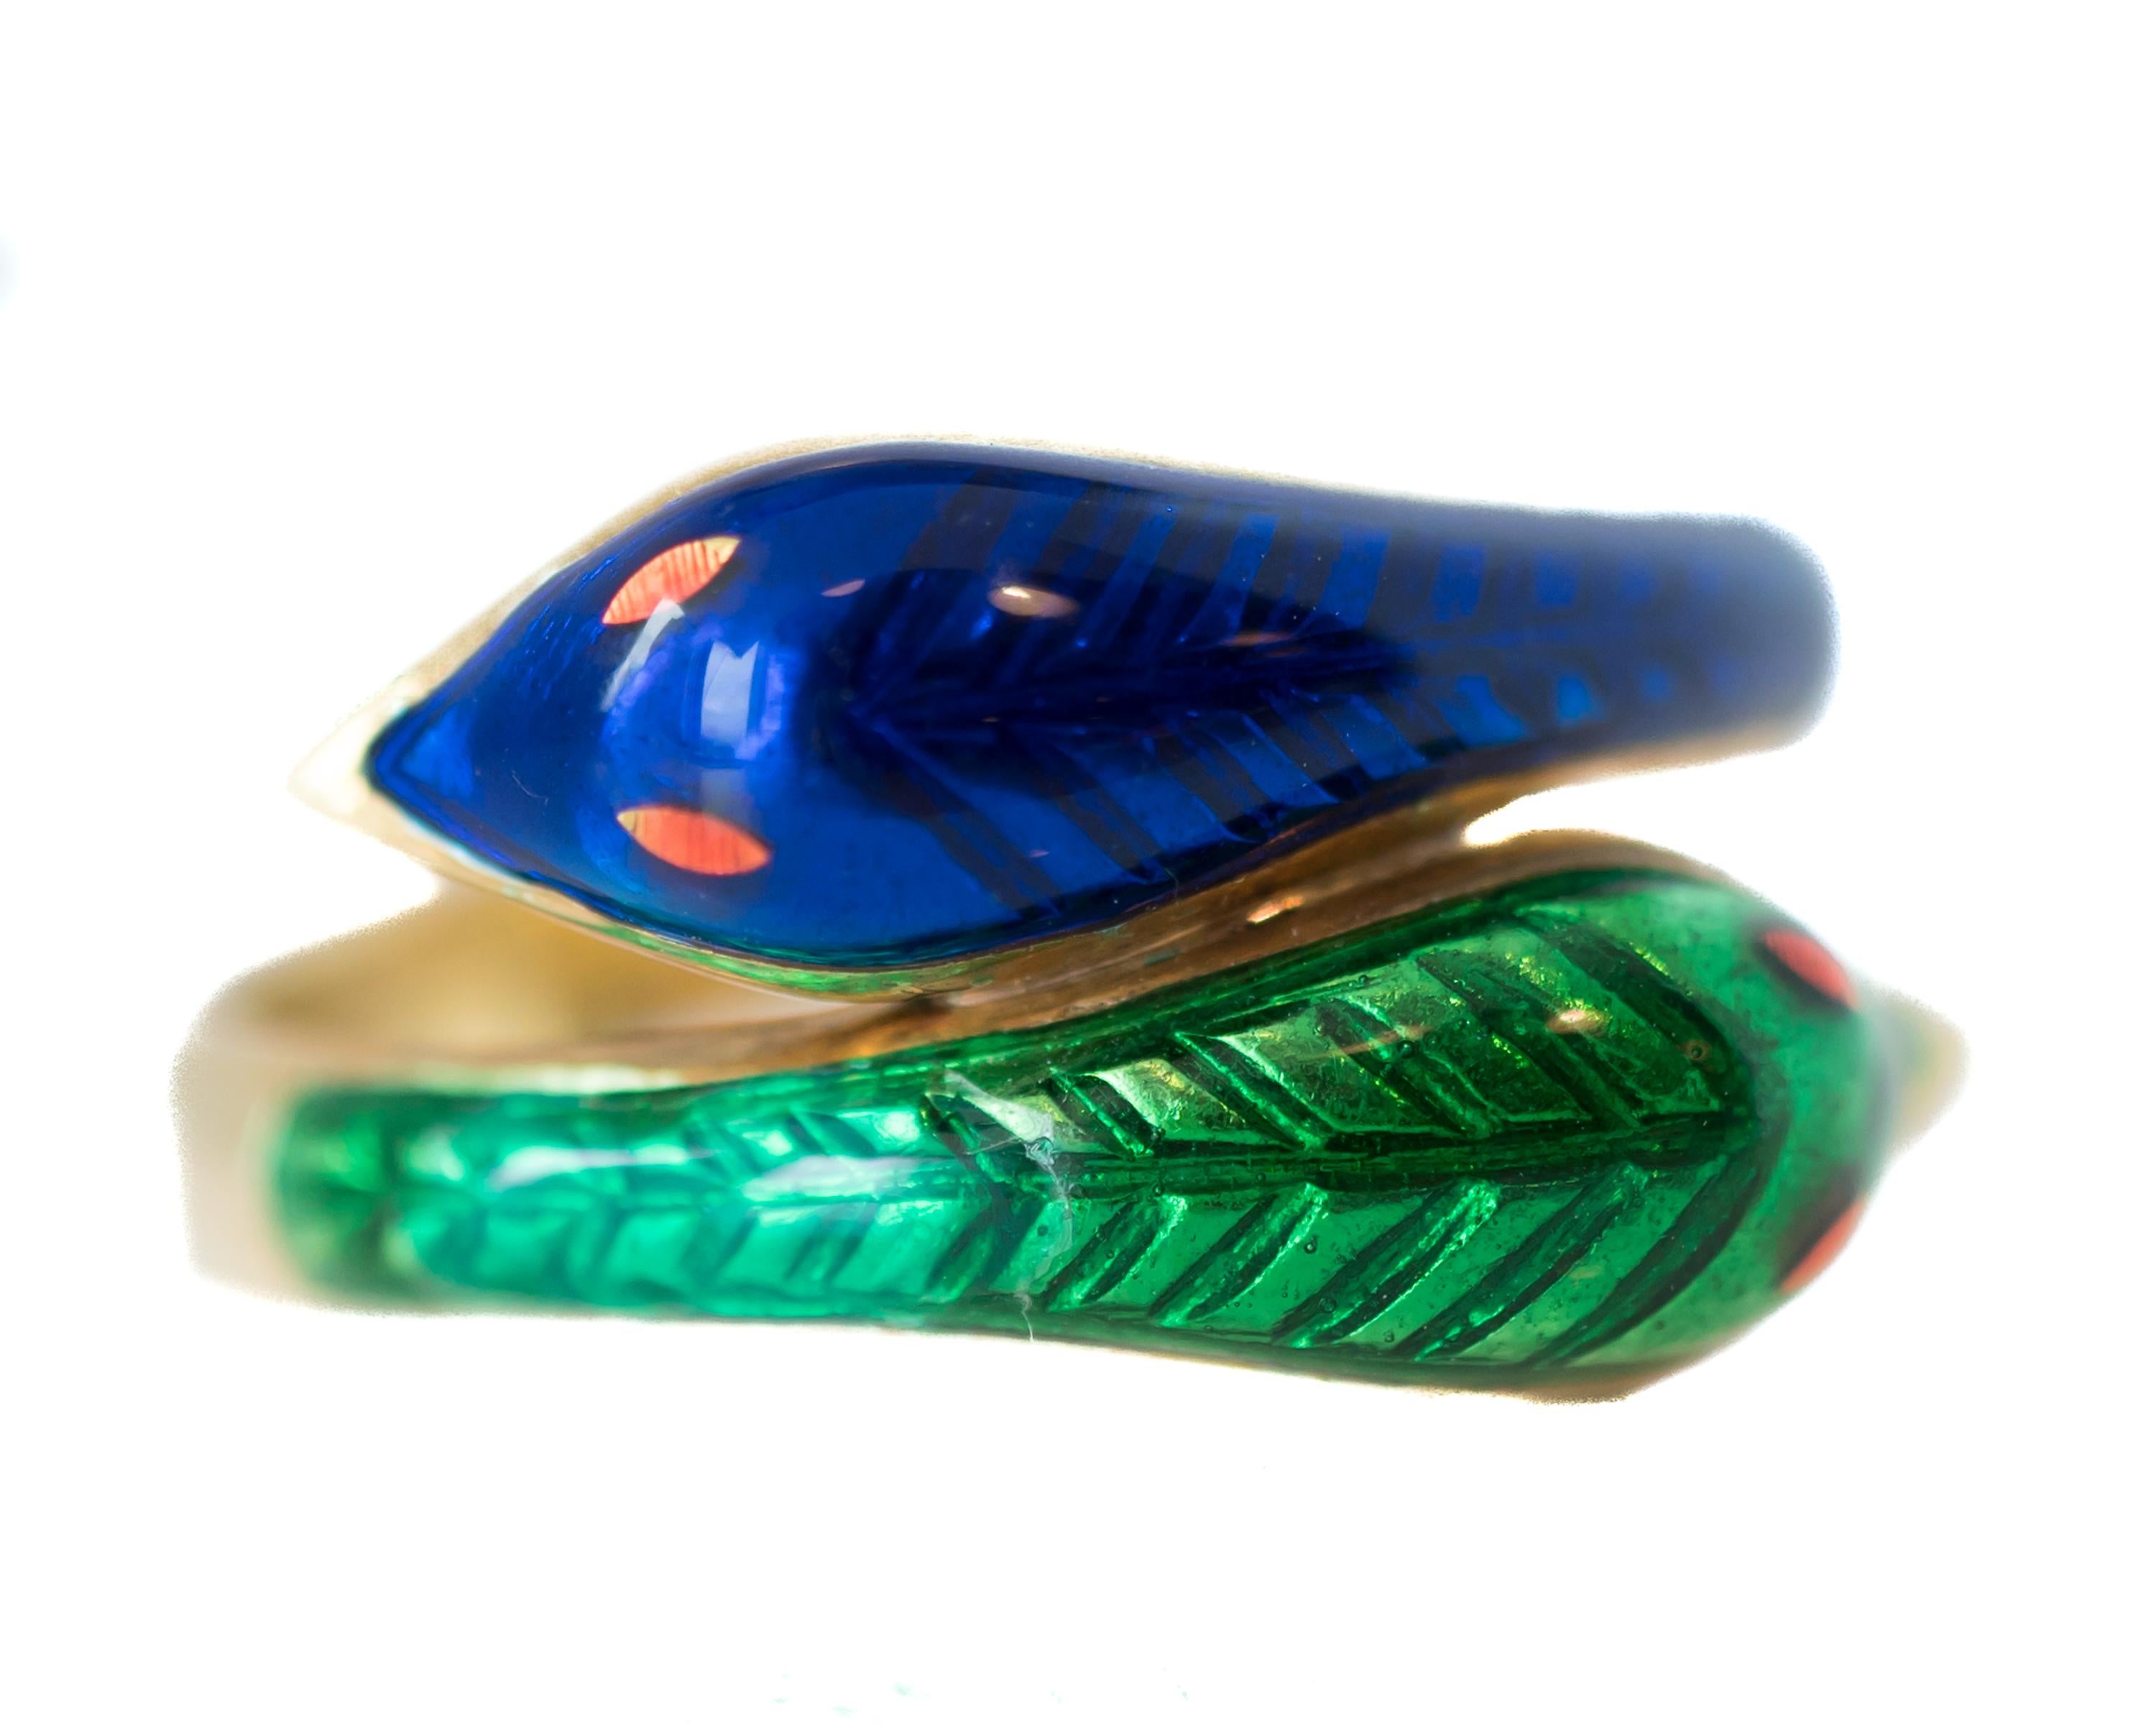 Two-Headed Snake Ring - 18 Karat Yellow Gold, Enamel


Colorful, gorgeous ring with amazing detail. The upper shank has 2 snake heads framed in 18 karat Yellow Gold. One head has deep, lapis blue enamel, the other has an emerald green enamel. Each